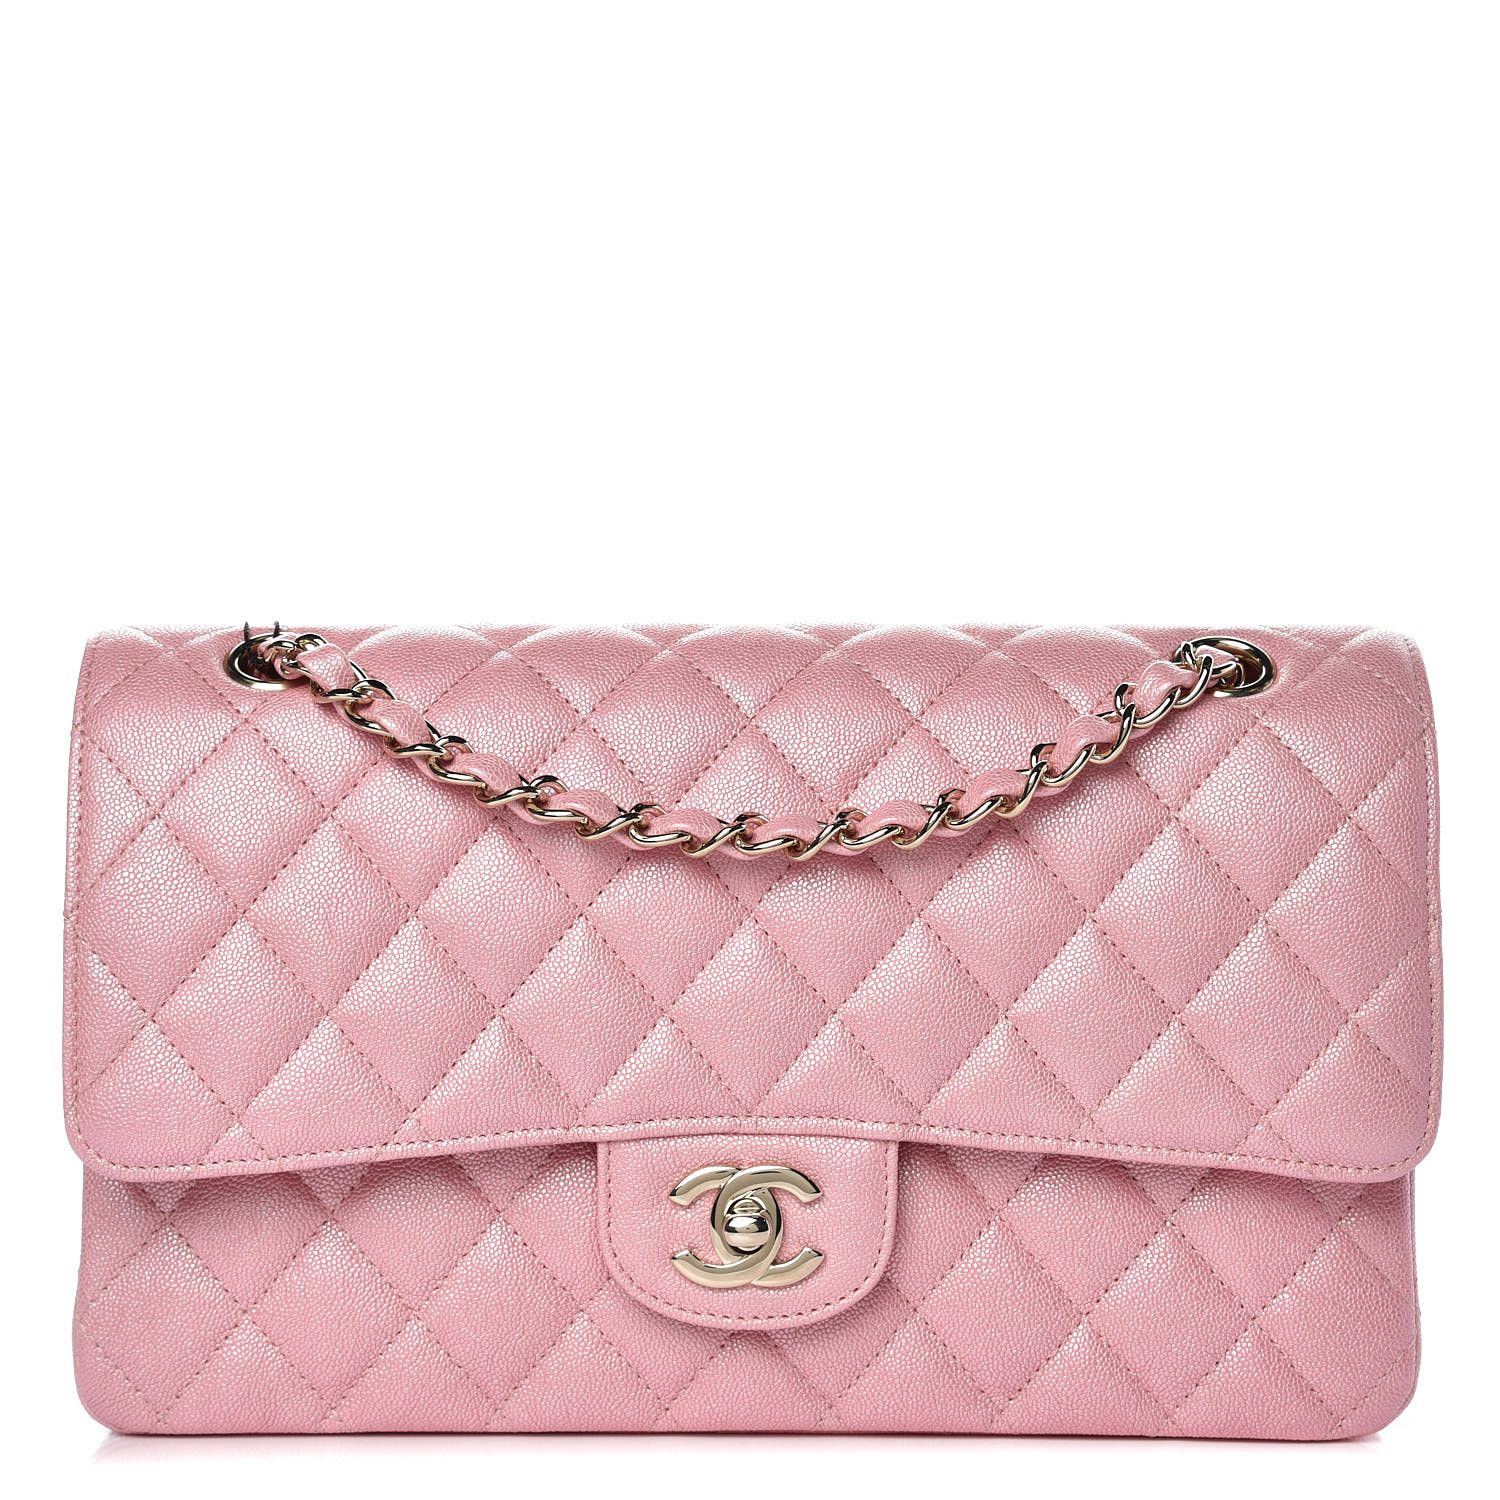 CHANEL Iridescent Caviar Quilted Medium Double Flap Rose Pink | Fashionphile